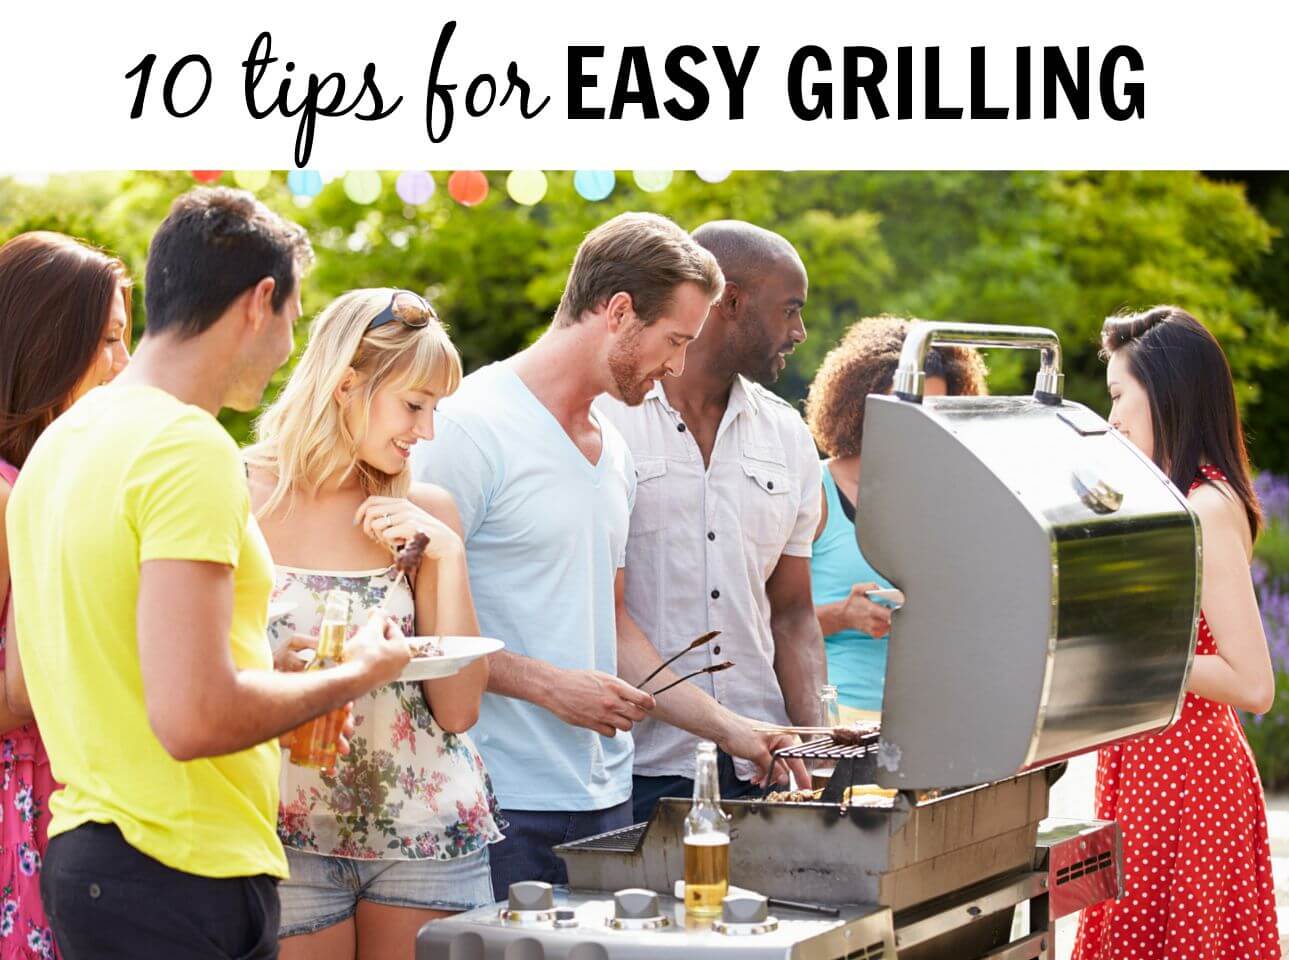 Before you fire up the grill check out these 10 tips for easy grilling